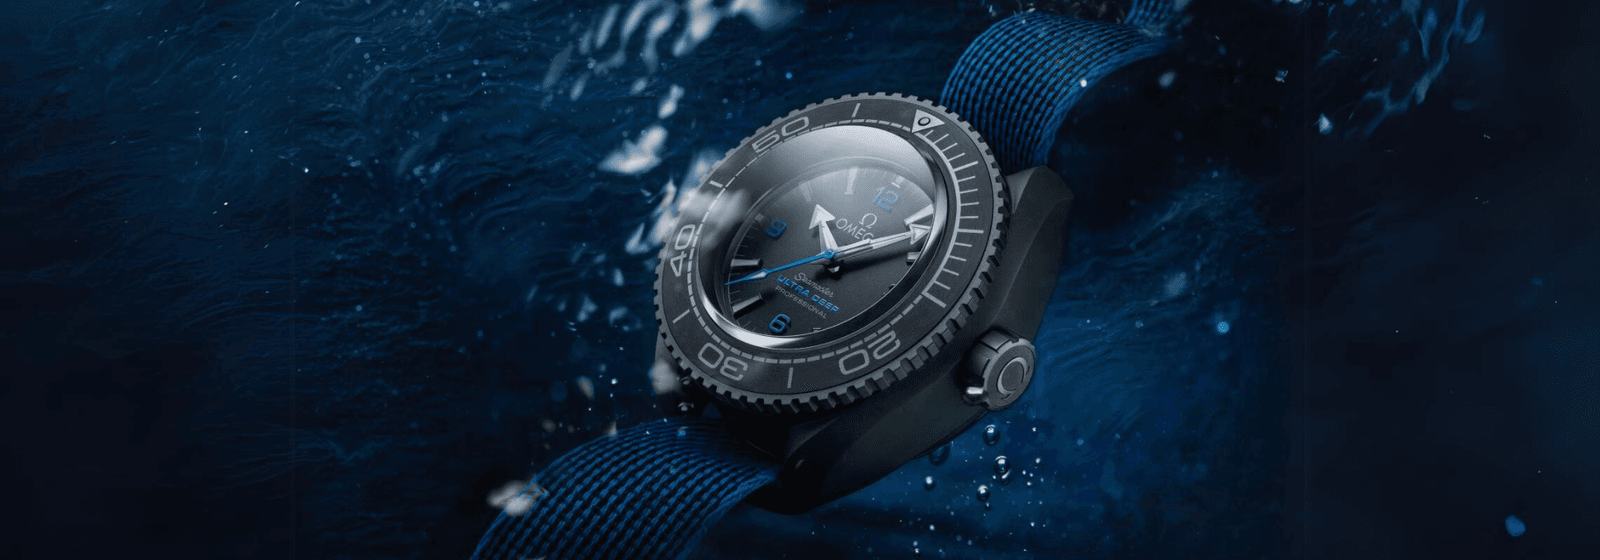 Omega's Love For The Oceans: The Depths Are Calling